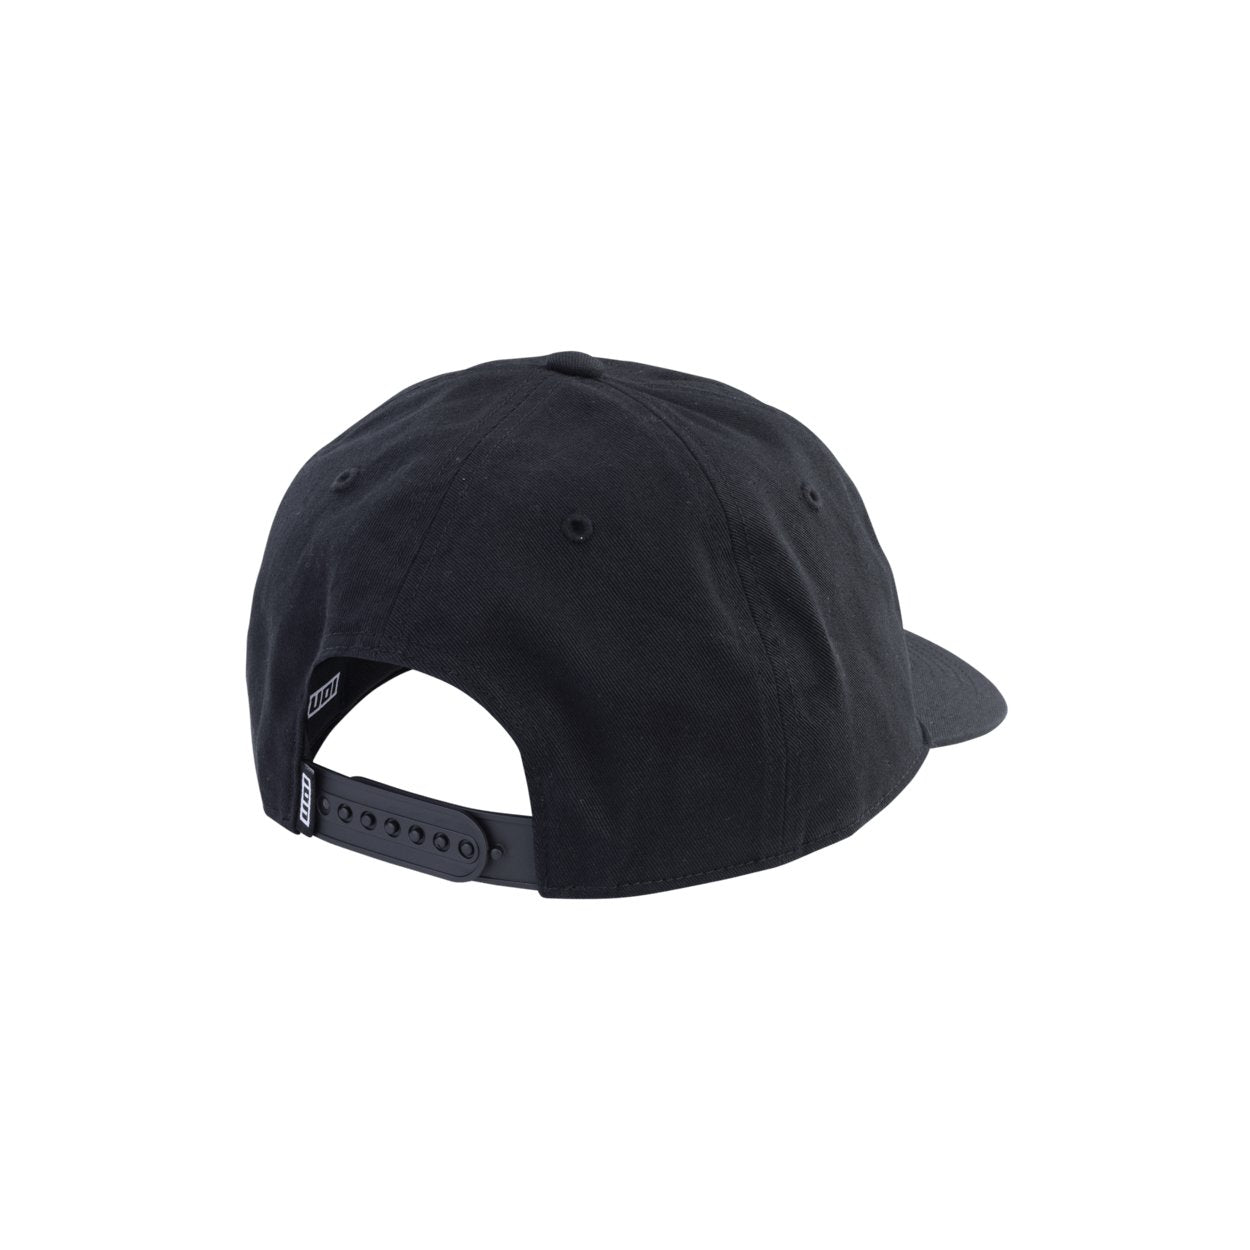 ION Cap Session 2025 - Worthing Watersports - 9010583208824 - Apparel - ION Bike